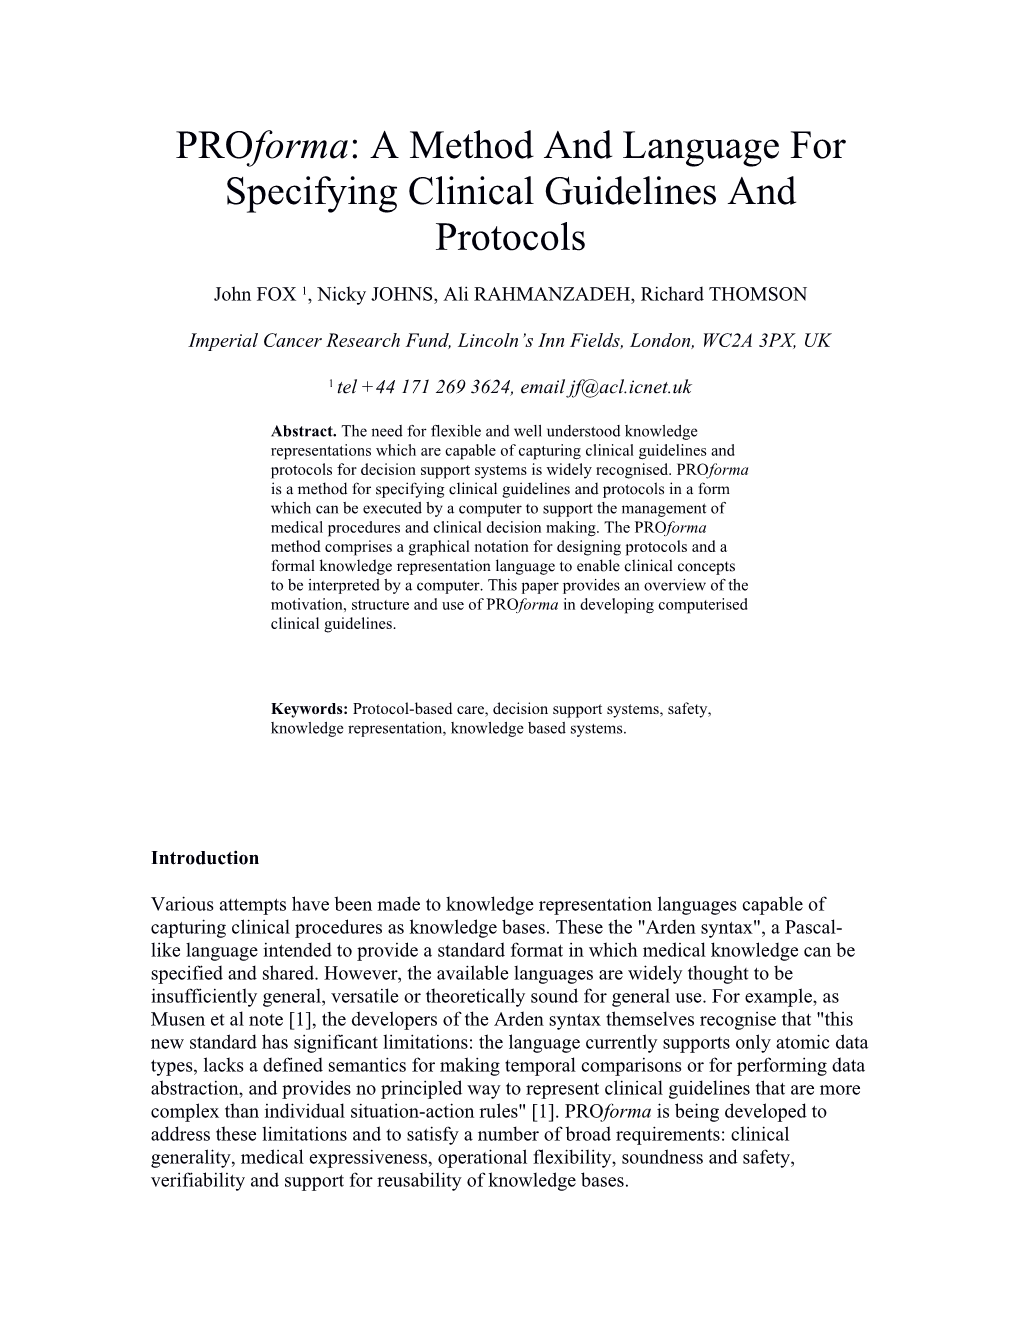 Proforma: a Method and Language for Specifying Clinical Guidelines and Protocols